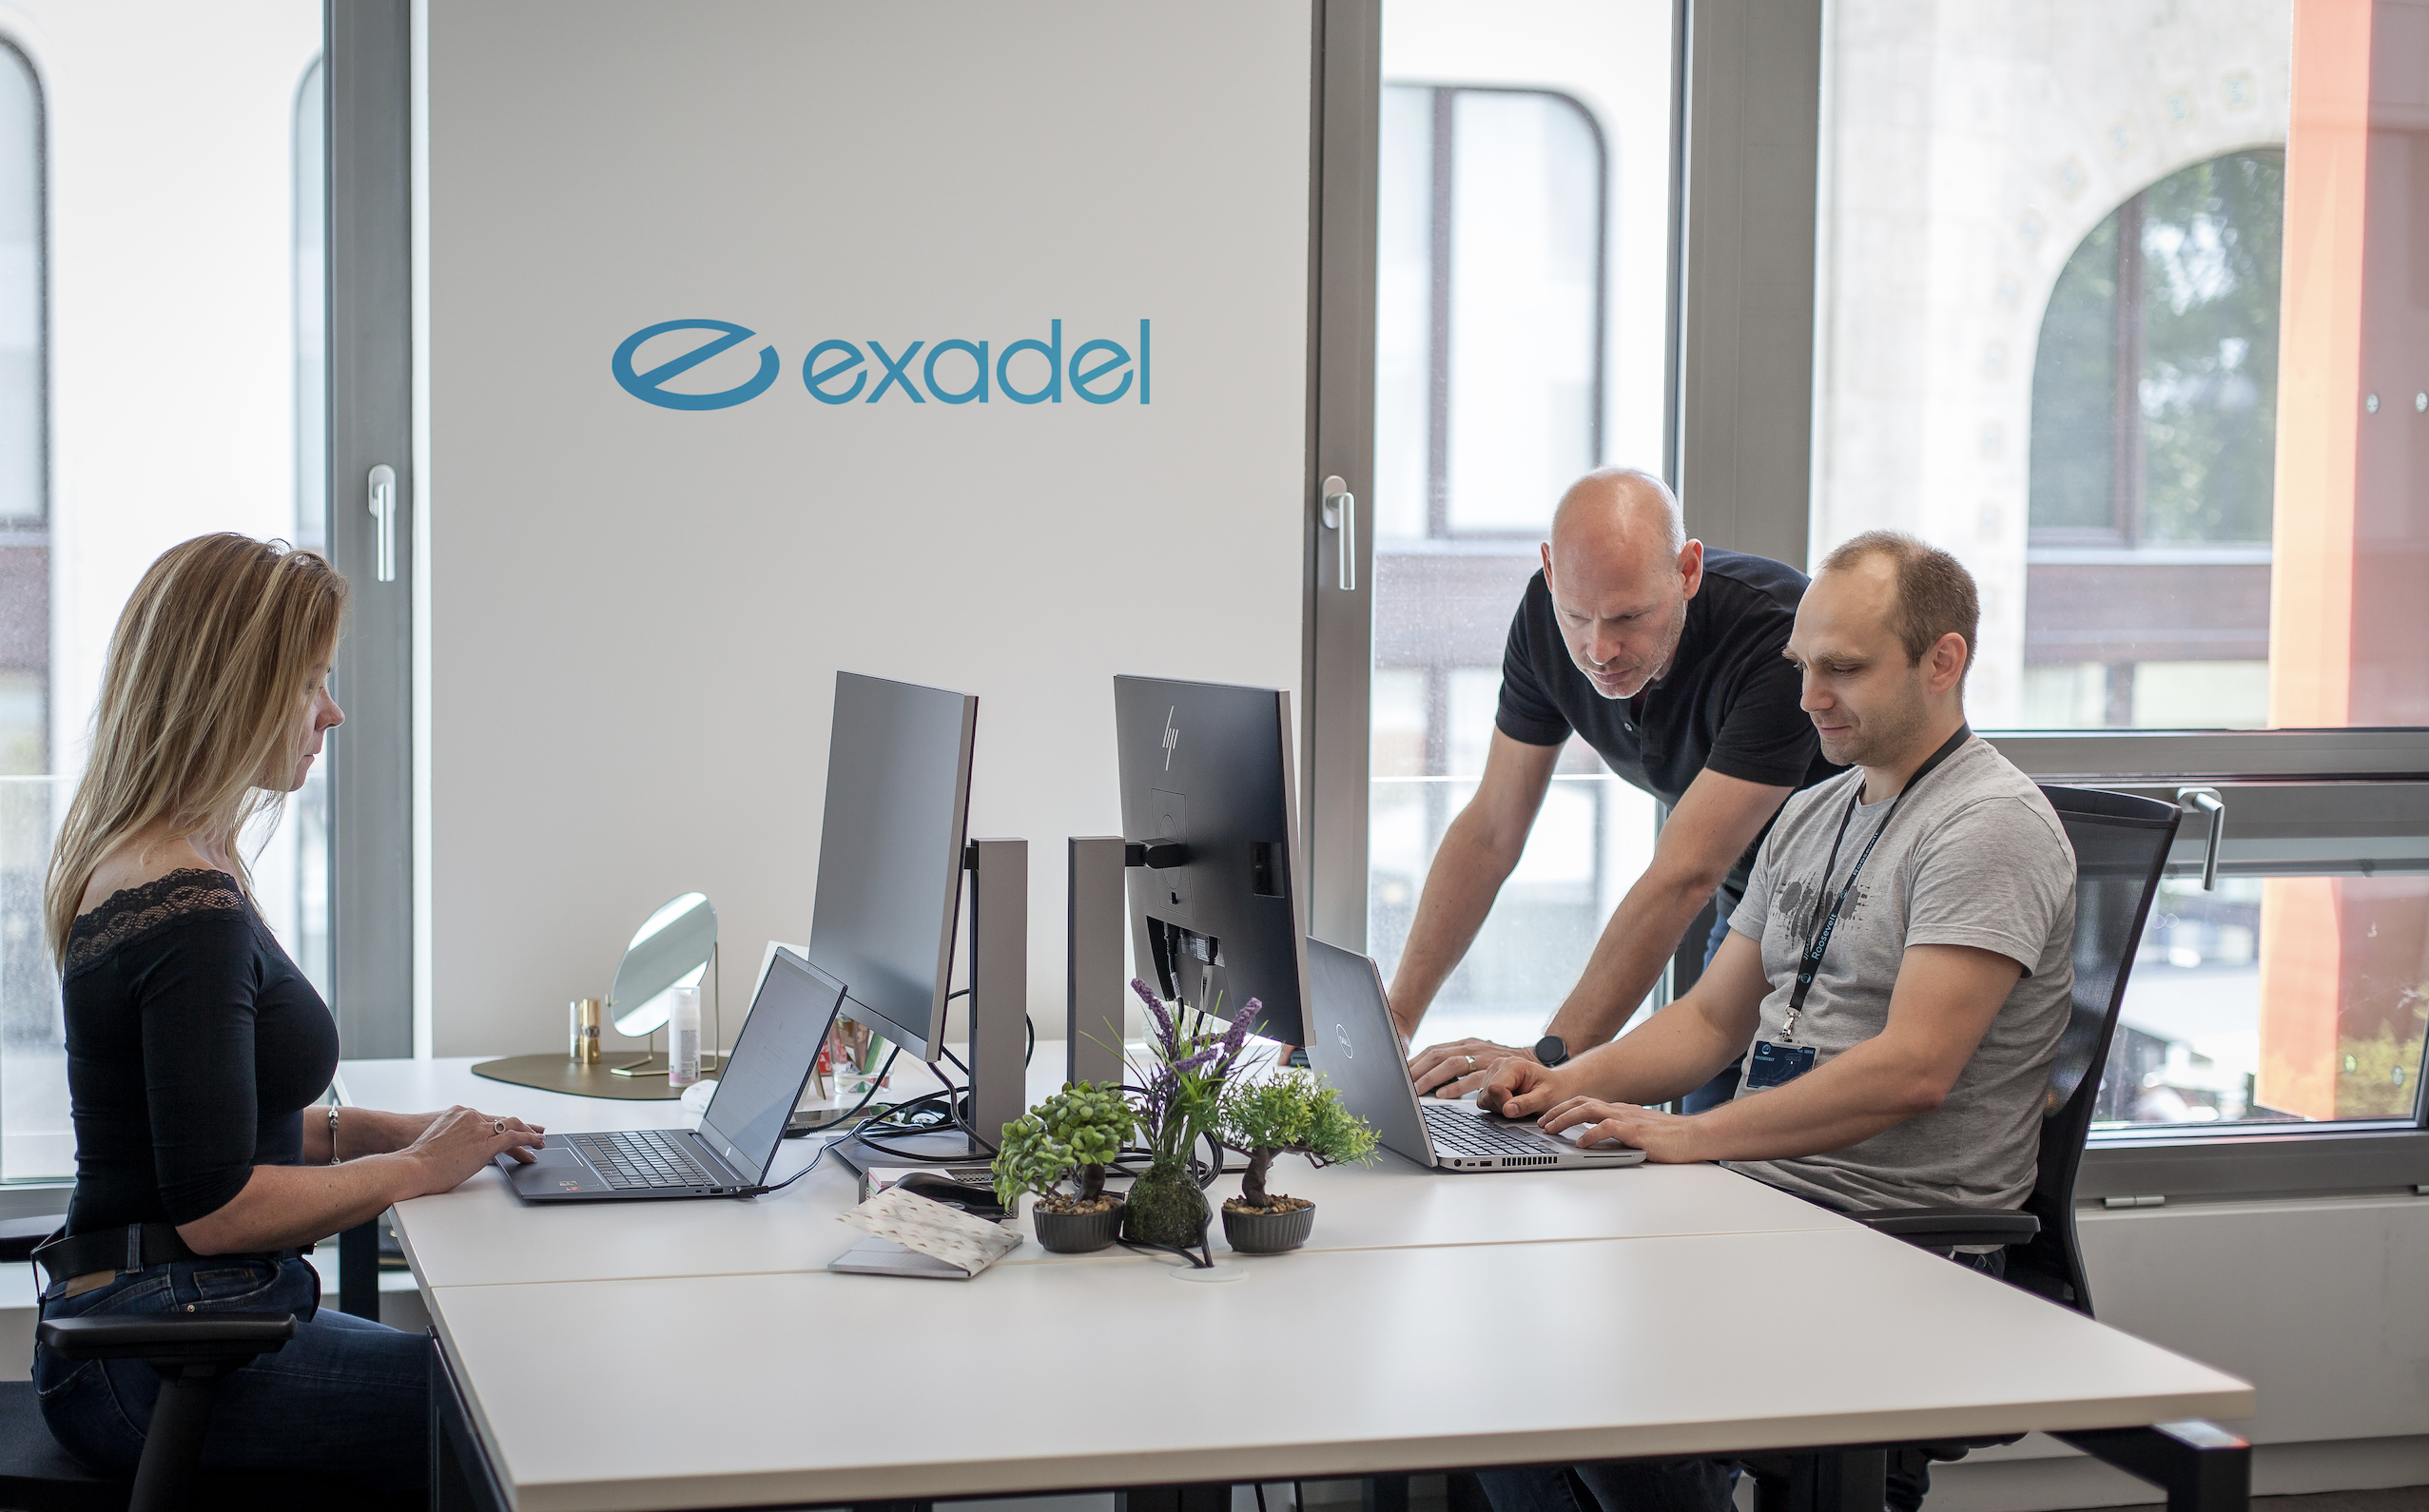 Exadel sets up center of excellence, starts recruitment driv...